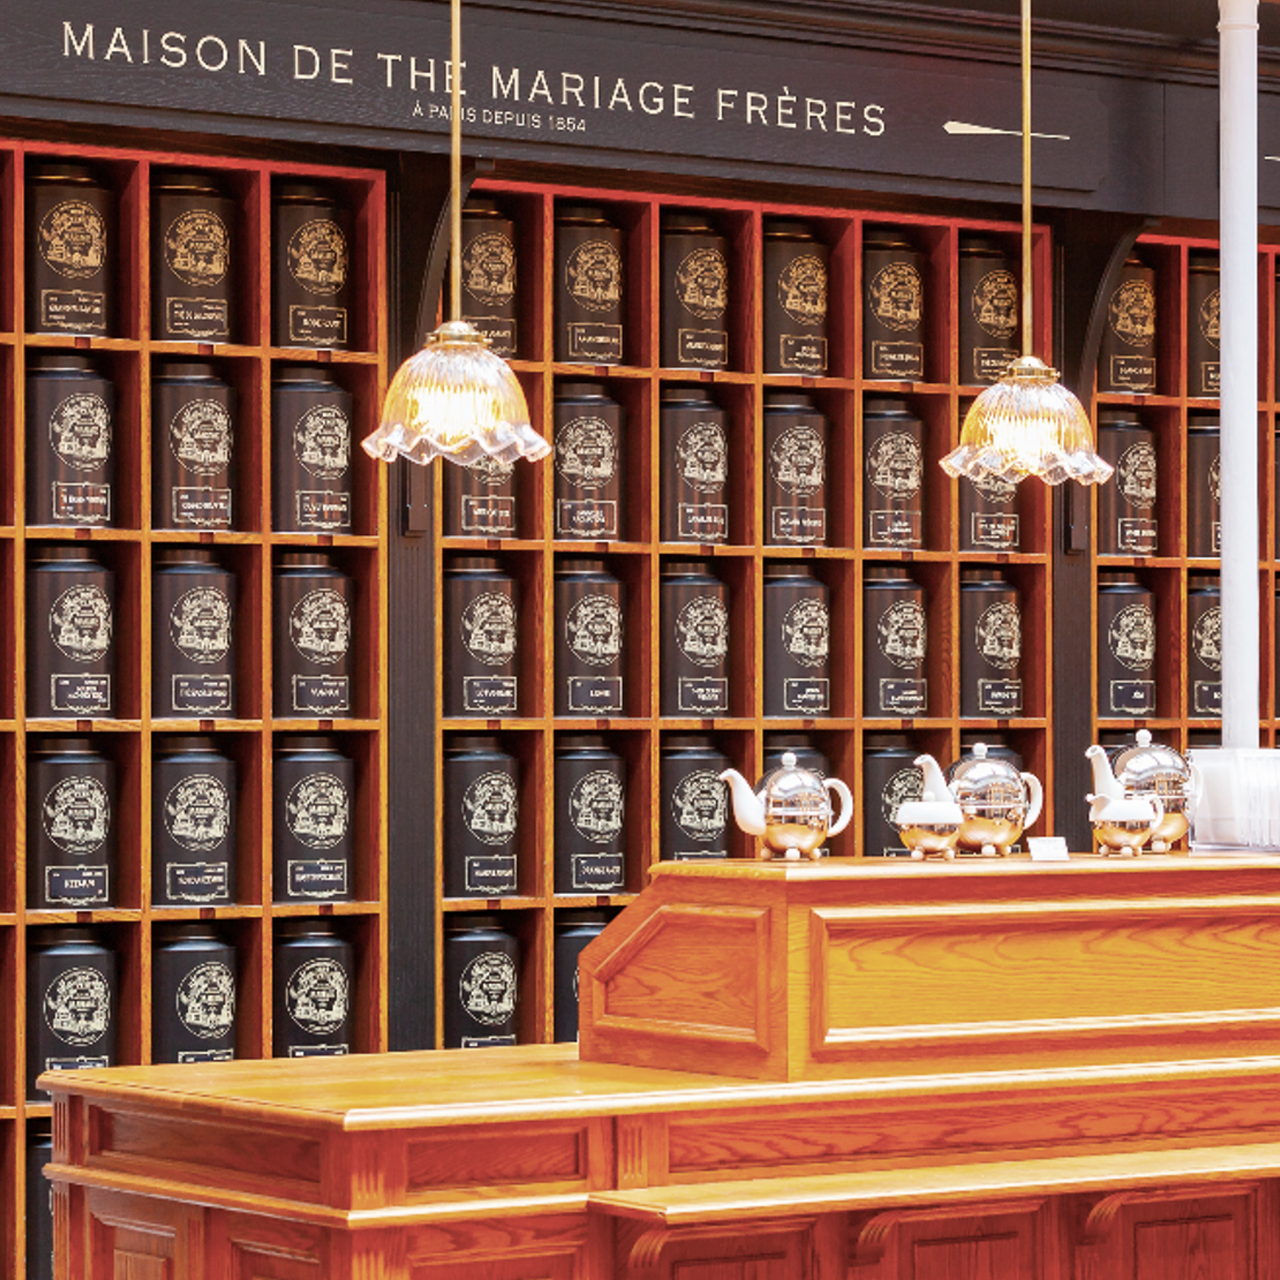 Mariage Freres shop front, Covent Garden, London. A smartly